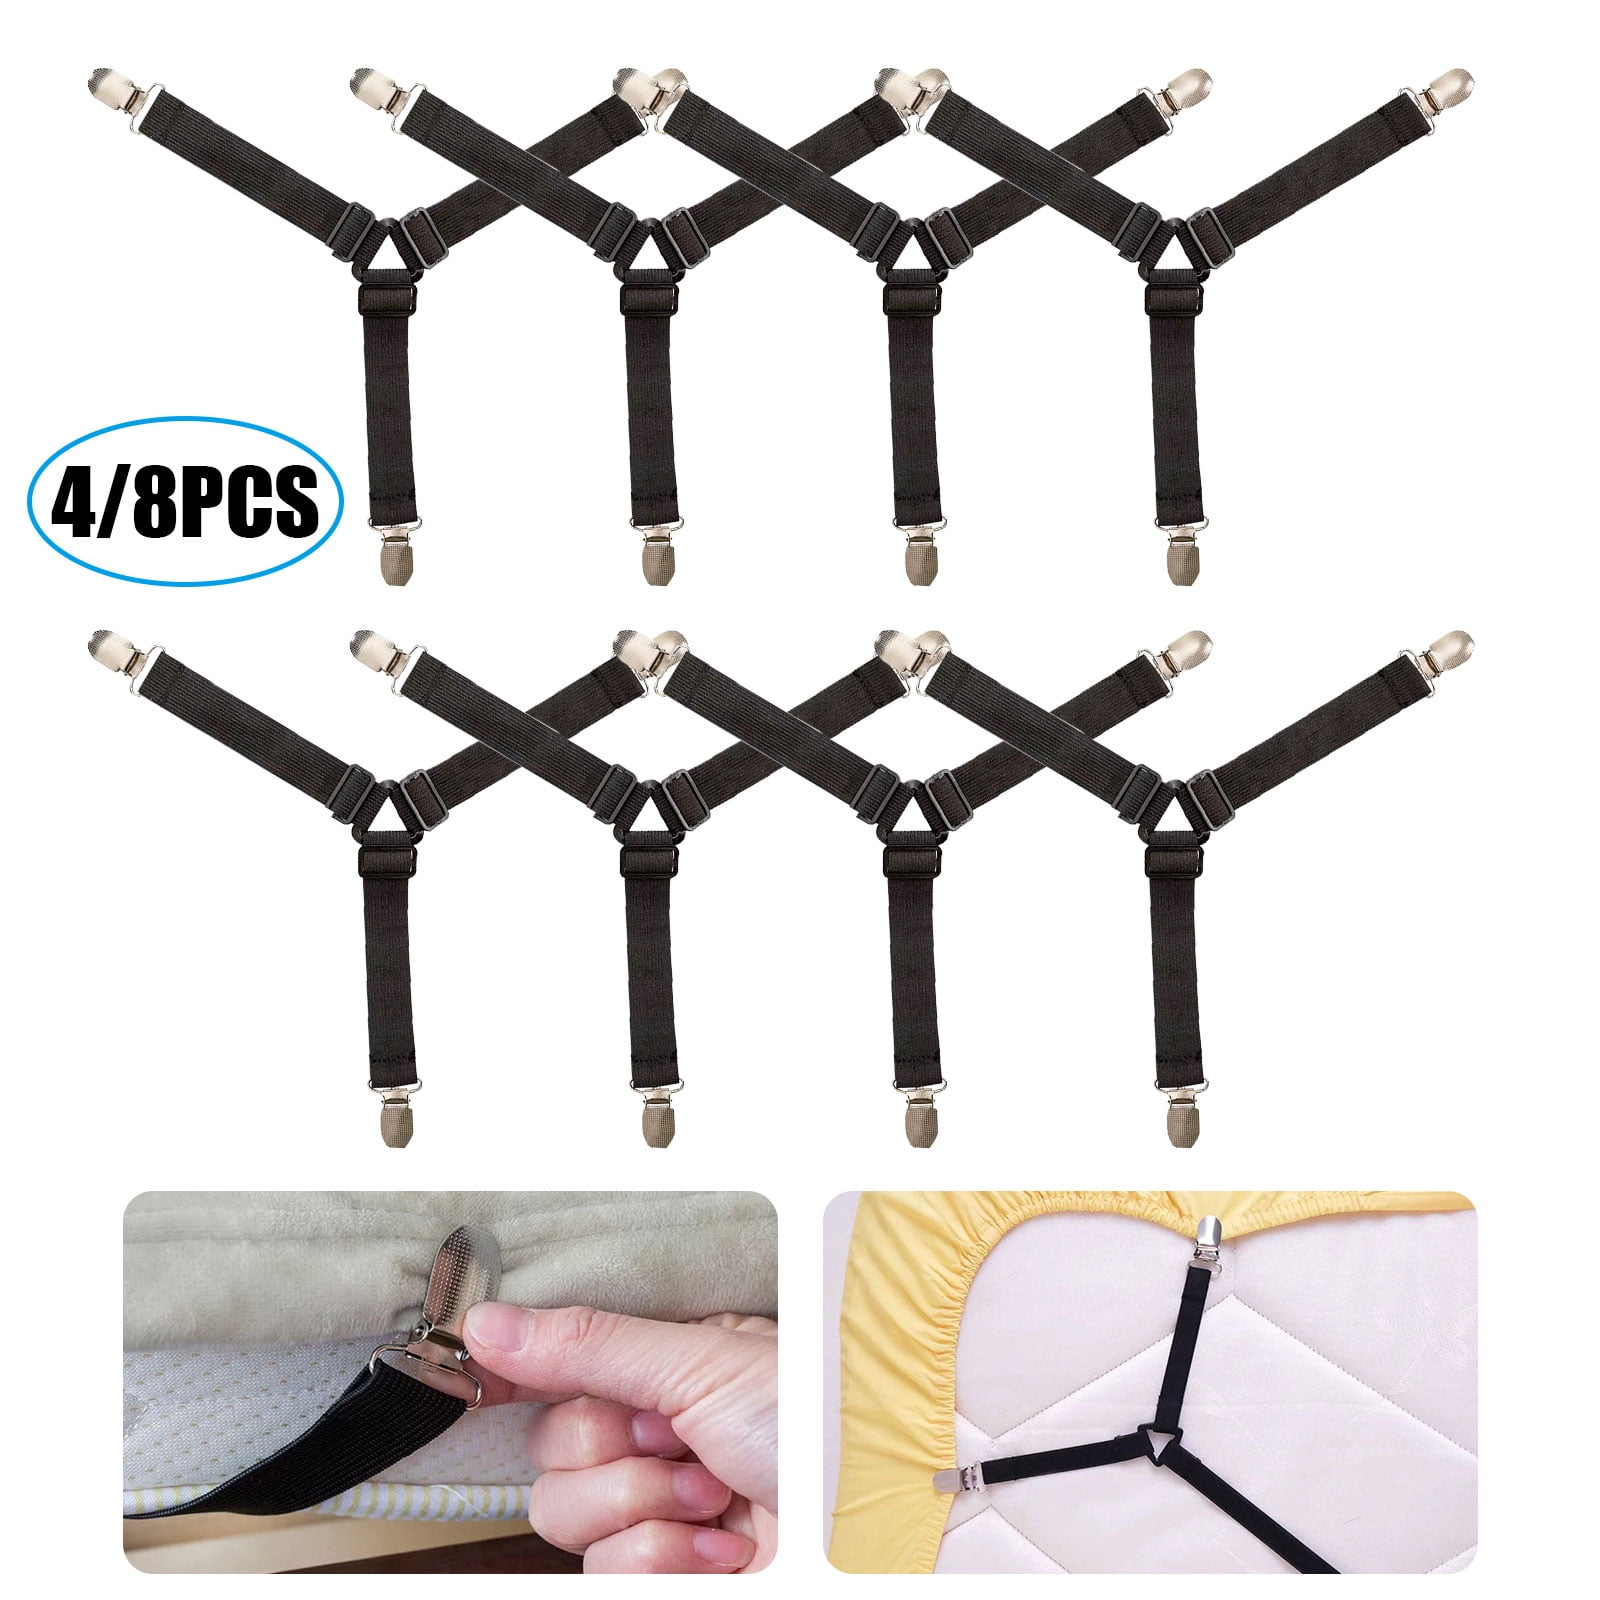 Triangle Suspender Holder Bed Mattress Sheet Straps Clips Grippers Fasteners  IS 